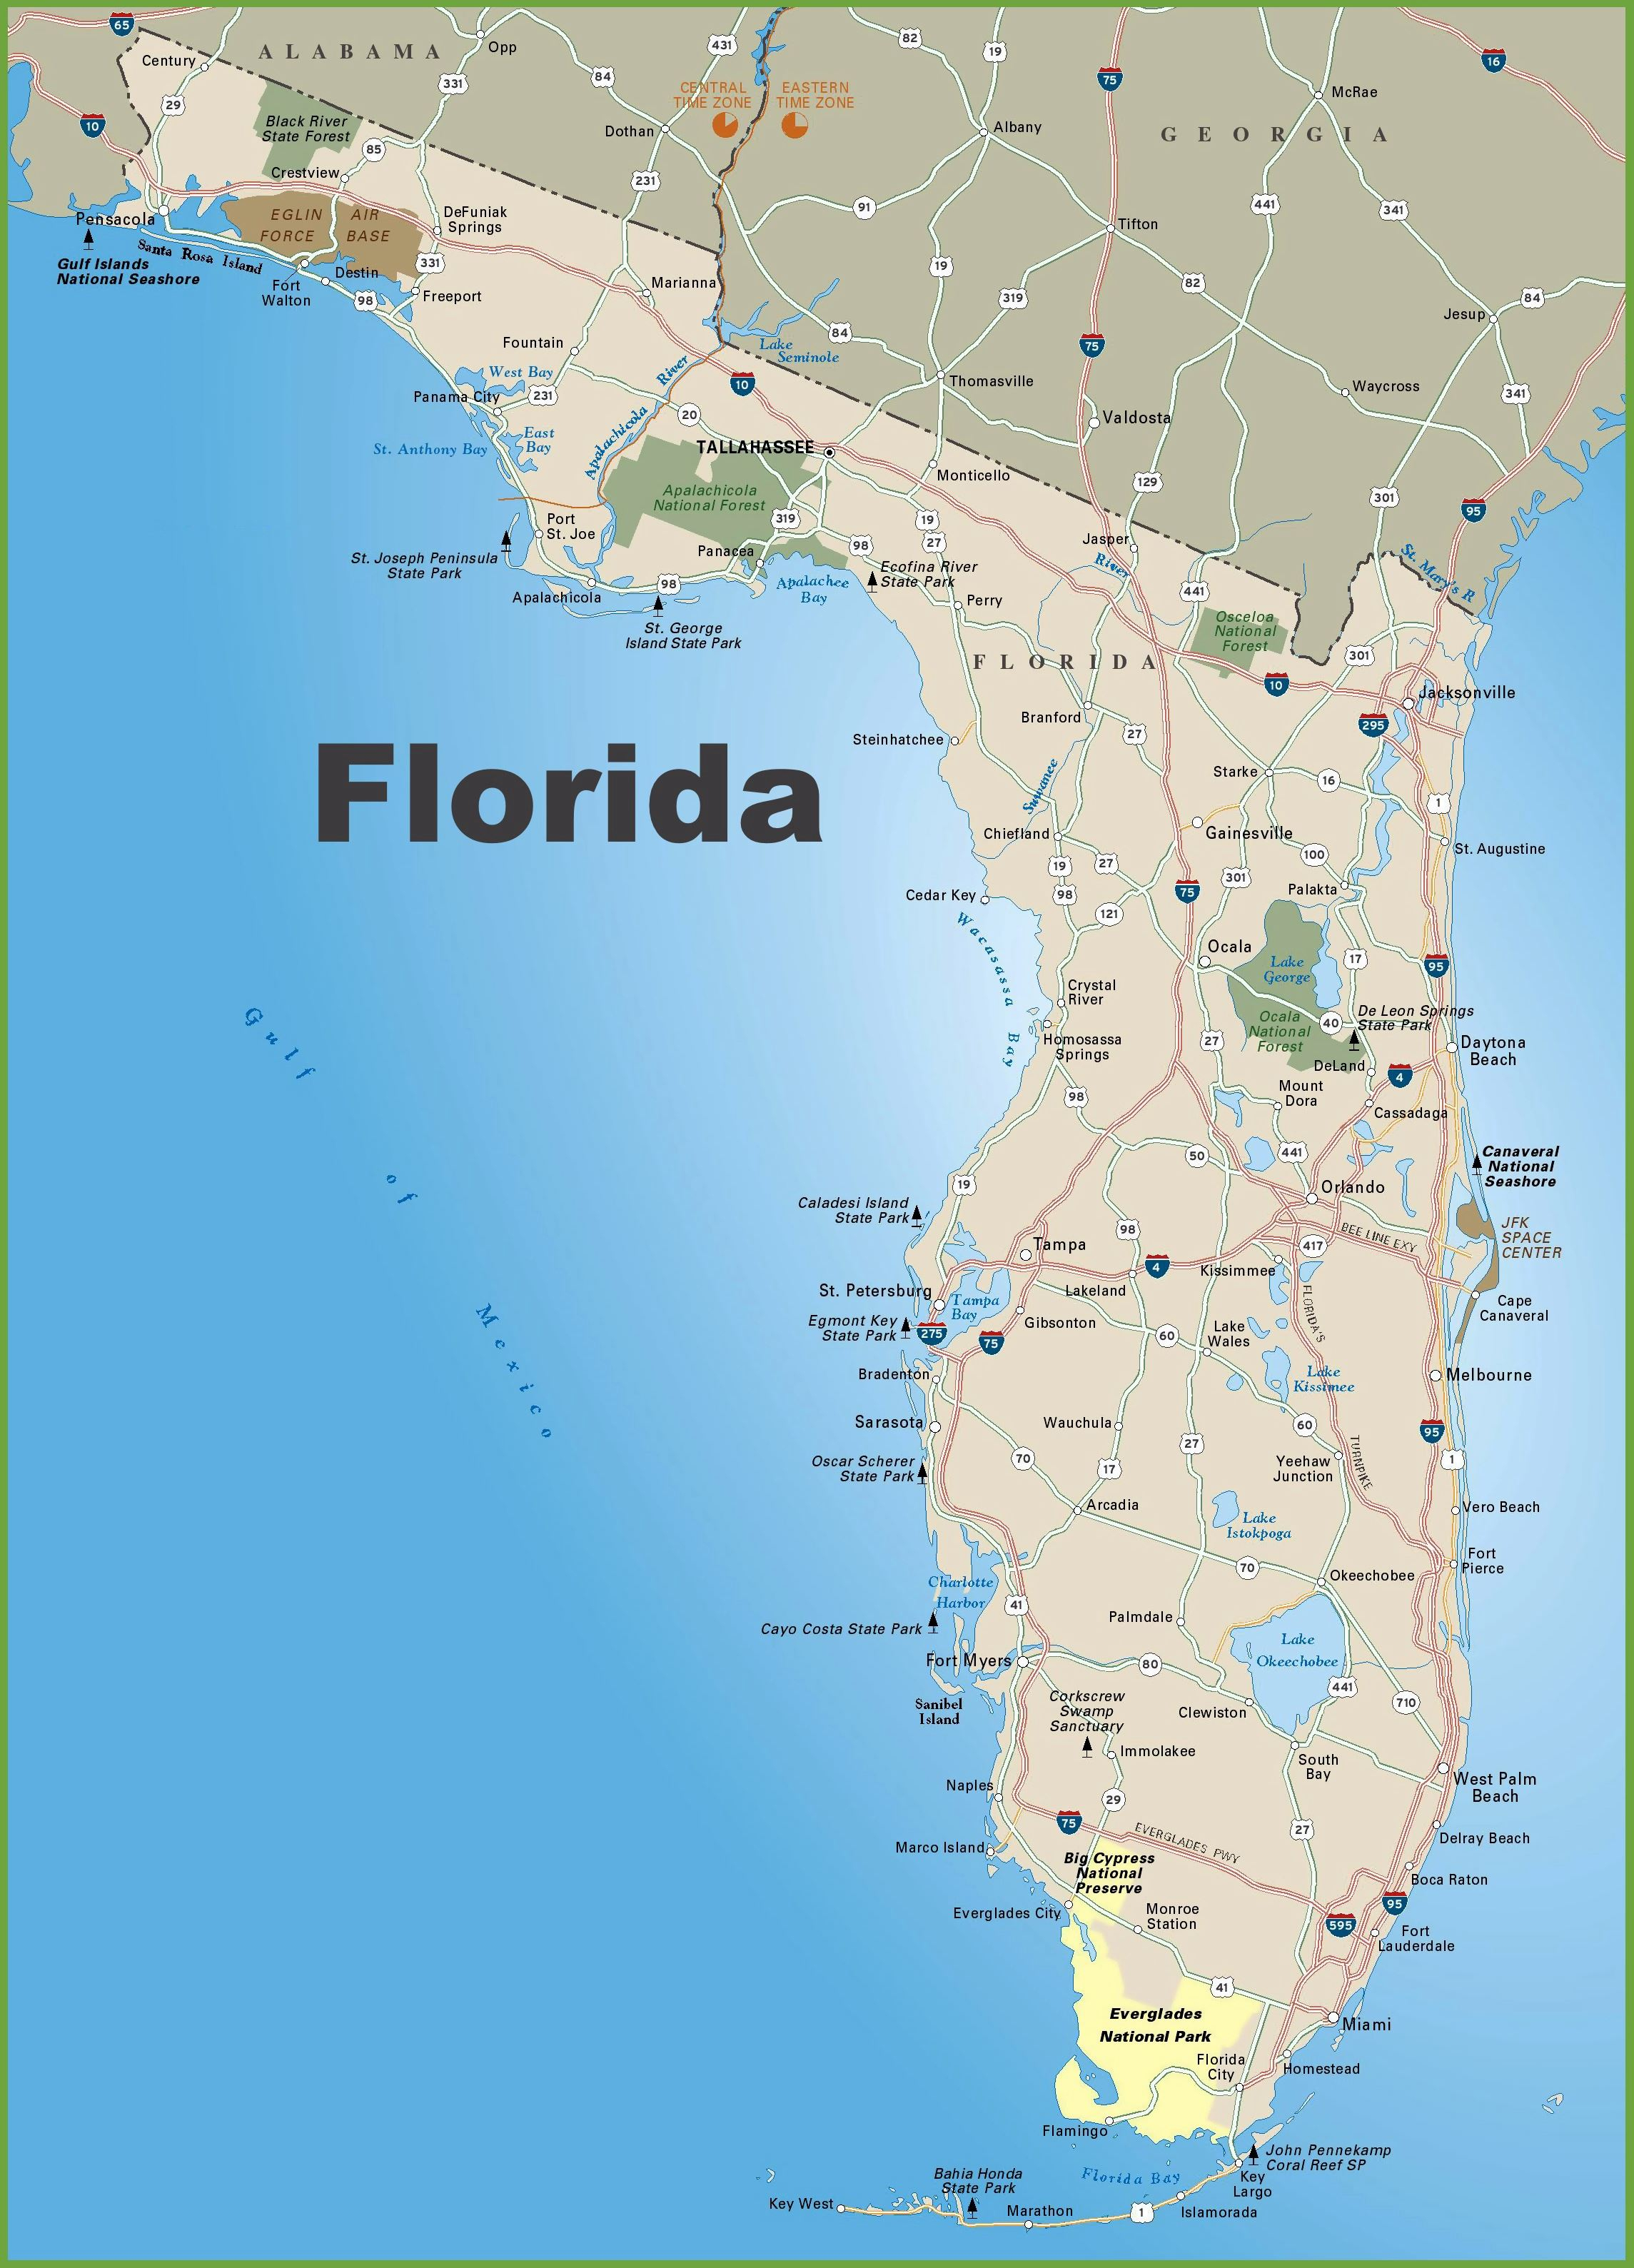 Large Florida Maps For Free Download And Print | High-Resolution And - Florida Casinos Map